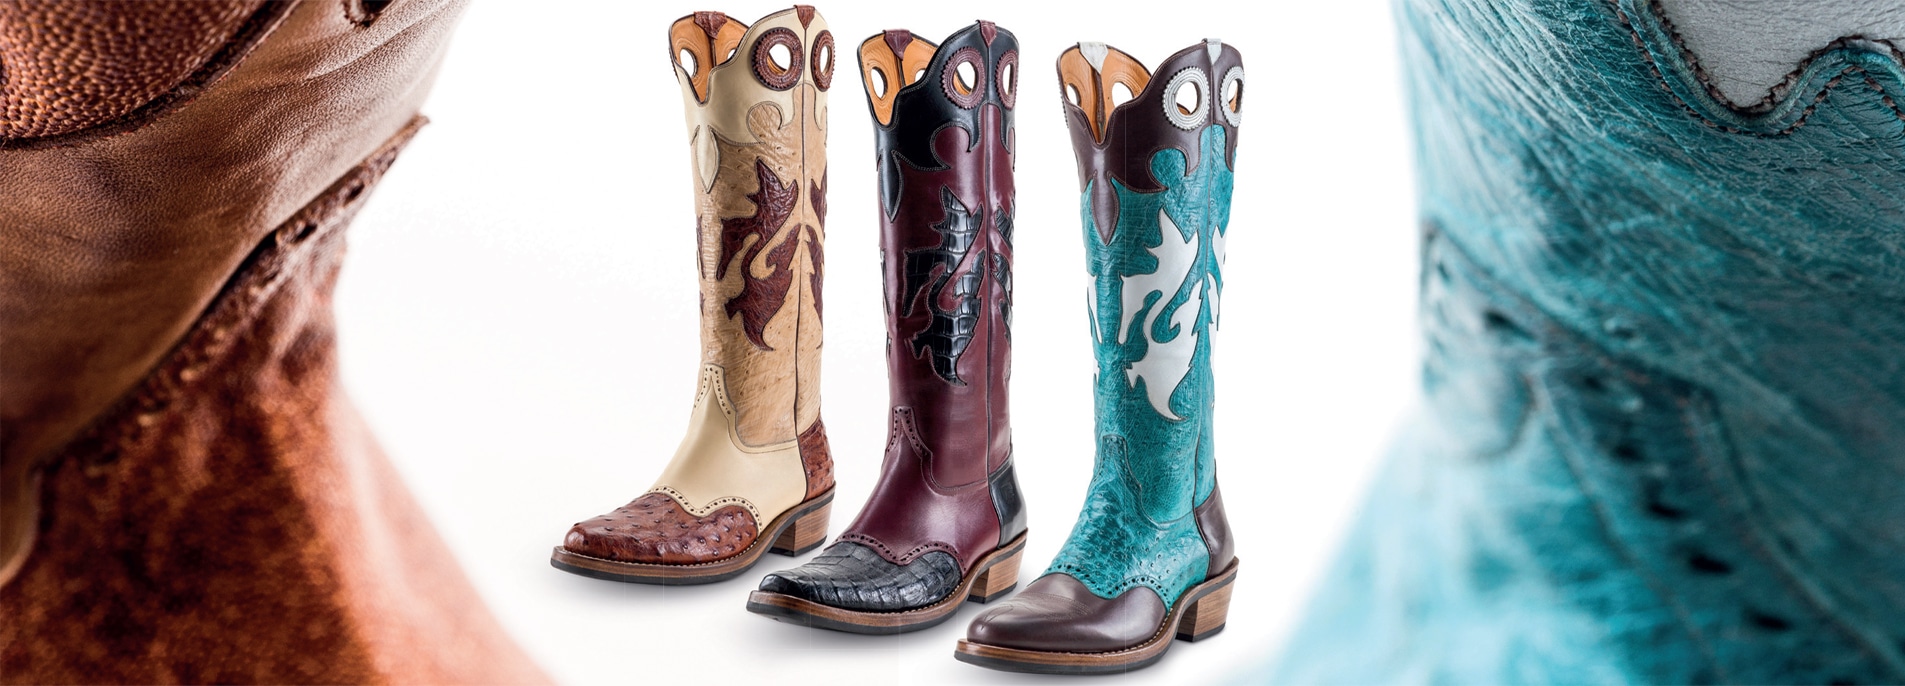 DeNiro Western boots - My Riding Boots - Western